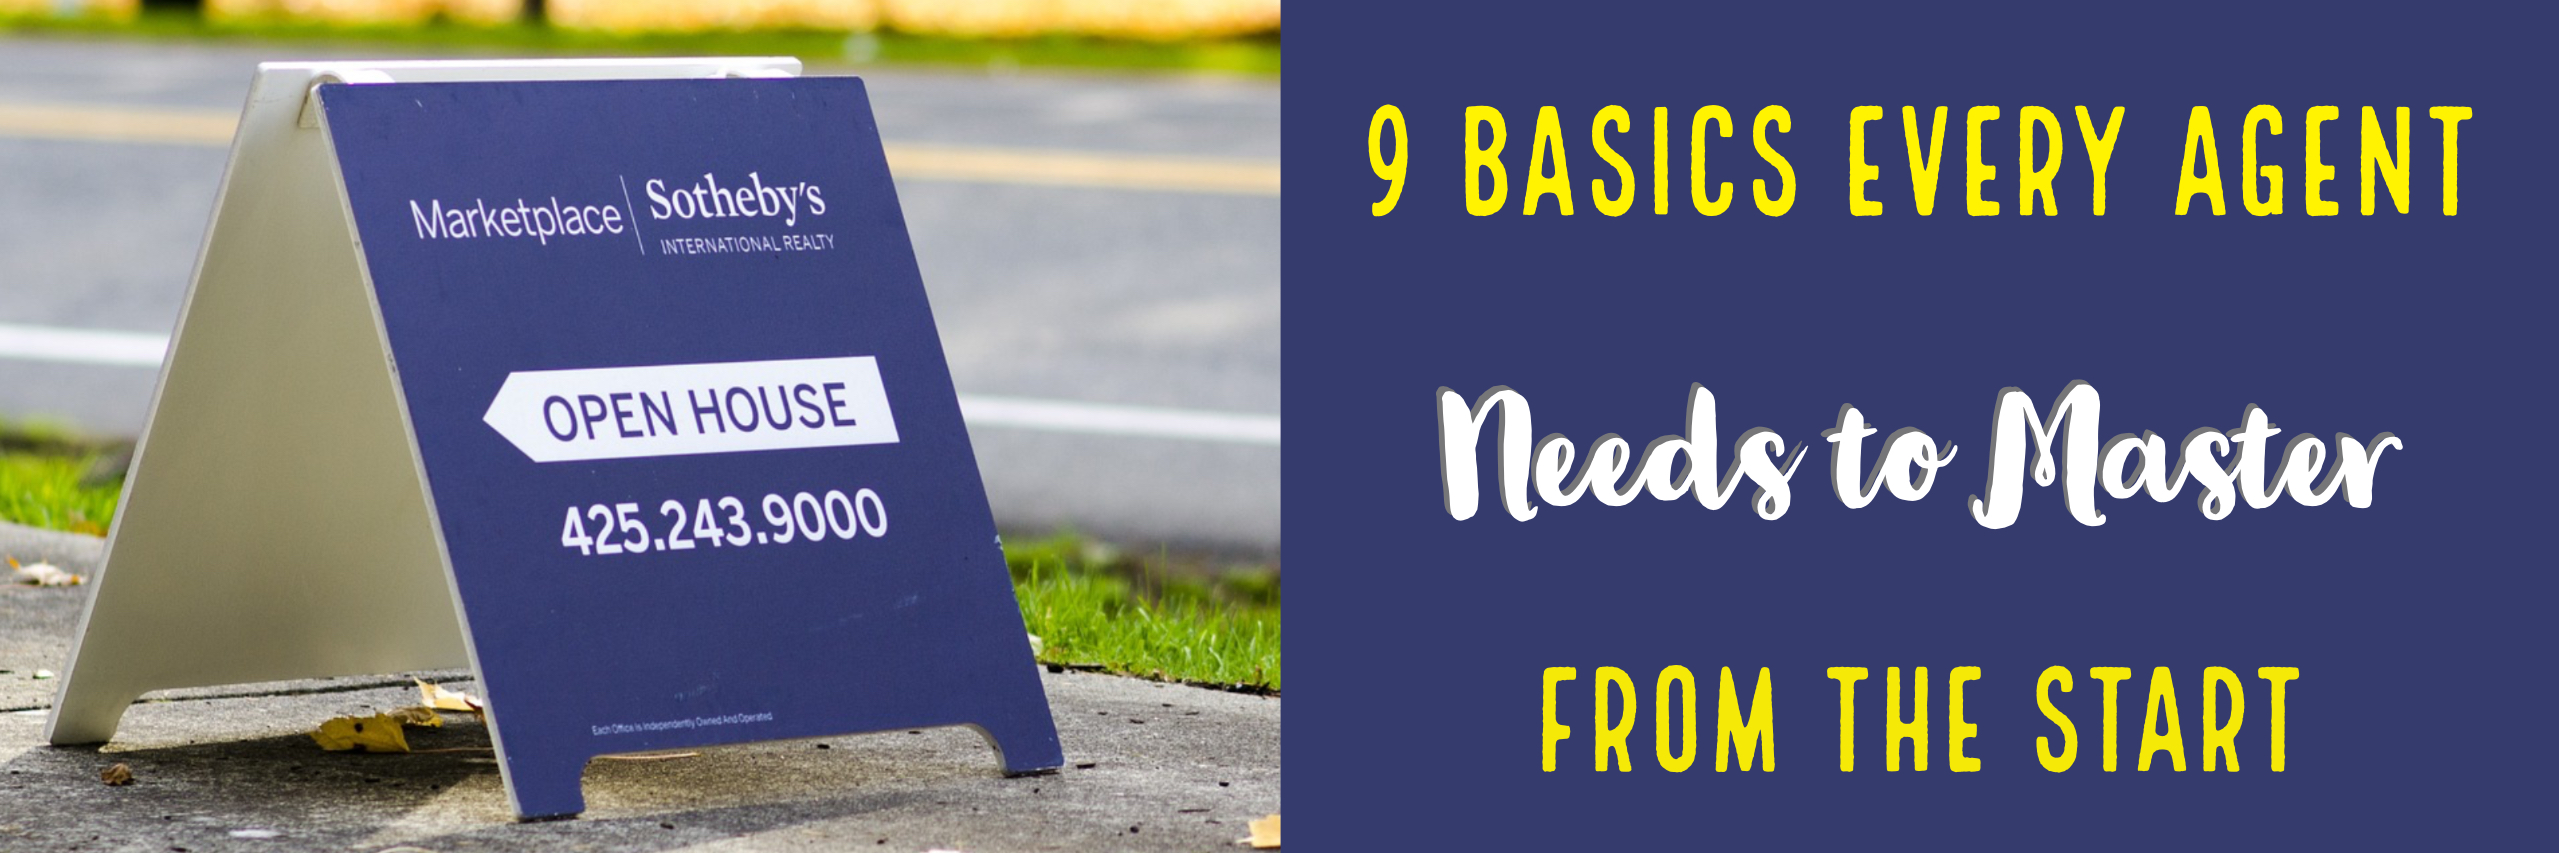 9 Basics Every Agent Needs to Master From the Start